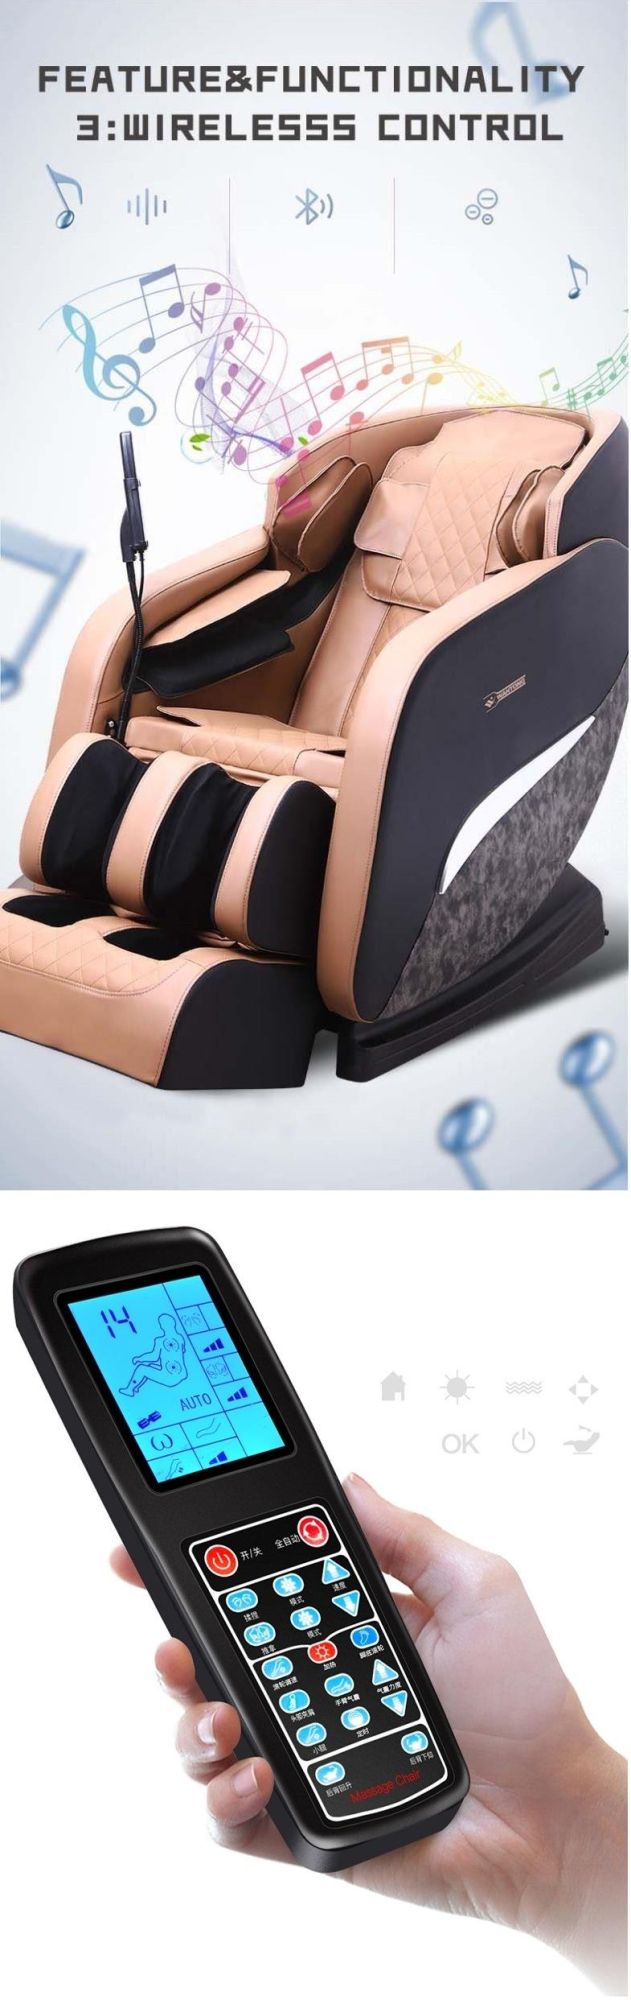 Zero Gravity Recliner Foot Roller 8d Massager Massage Chair to Relax Body and Mind